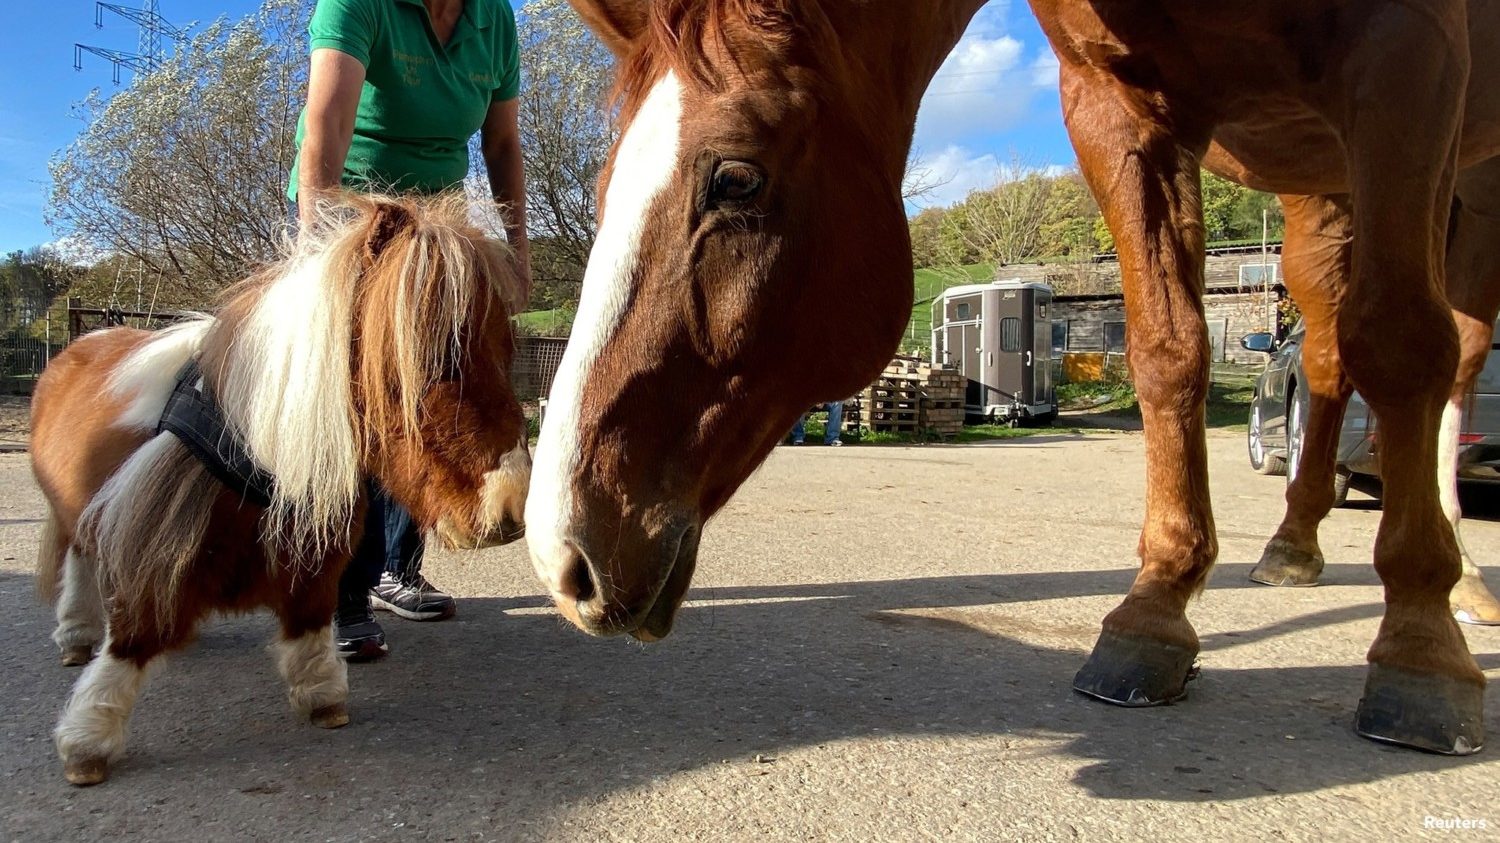 Pumuckel, the world's smallest horse, at left